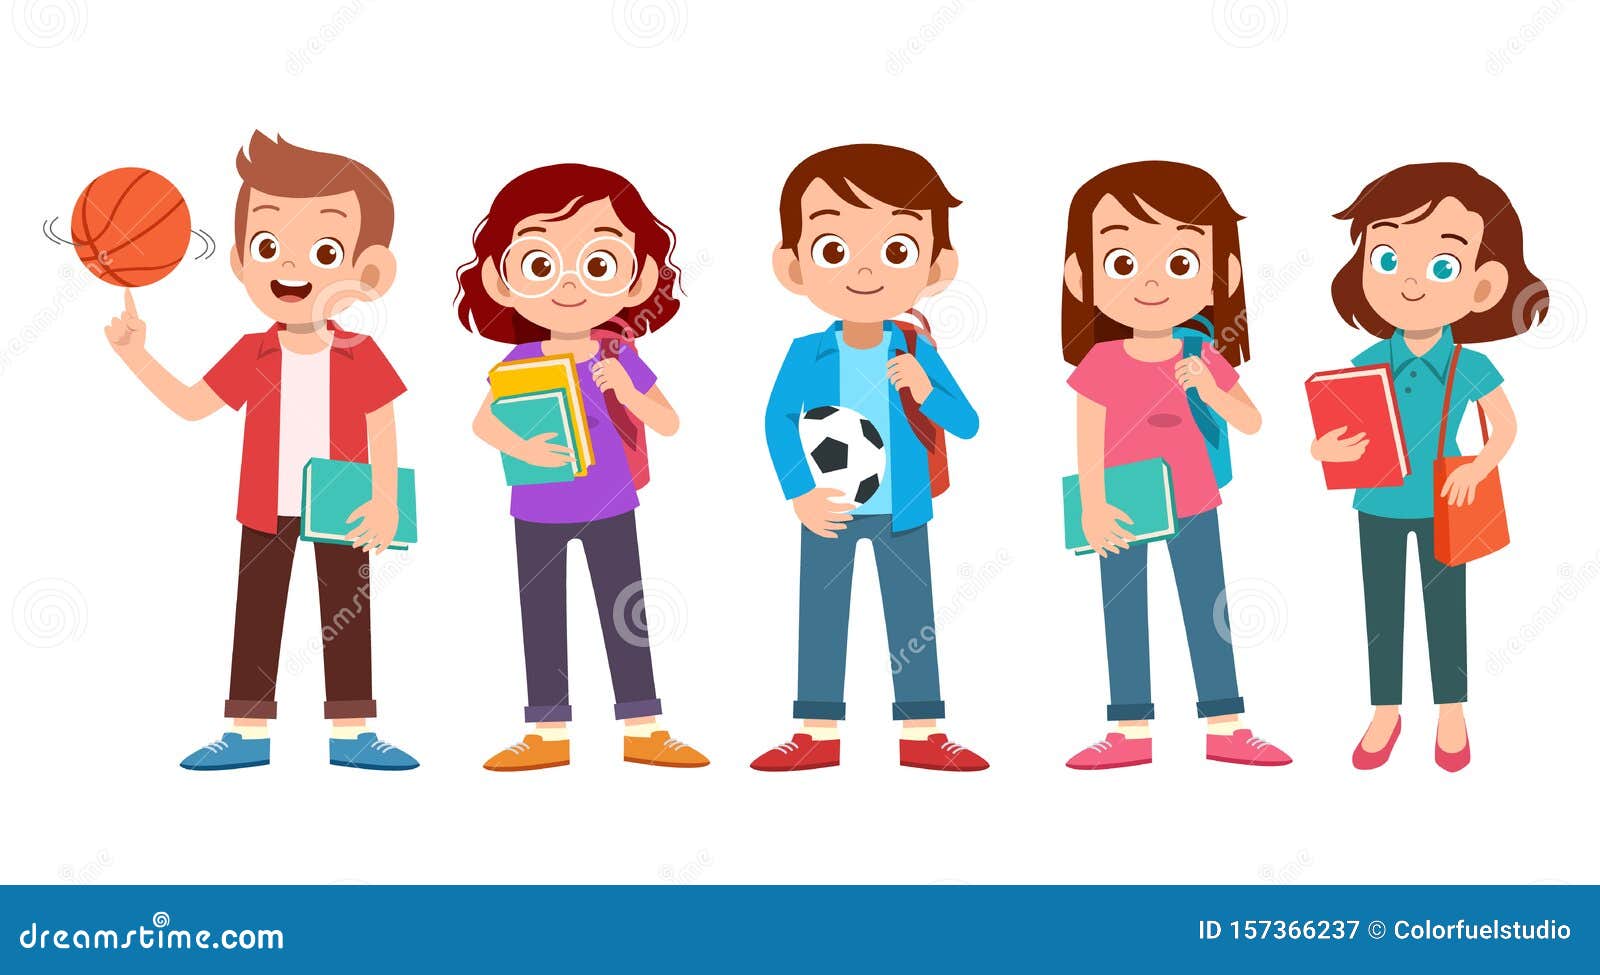 https://thumbs.dreamstime.com/z/teen-young-students-set-bundle-vector-woman-person-girl-book-school-cartoon-college-group-boy-happy-illustration-isolated-people-157366237.jpg